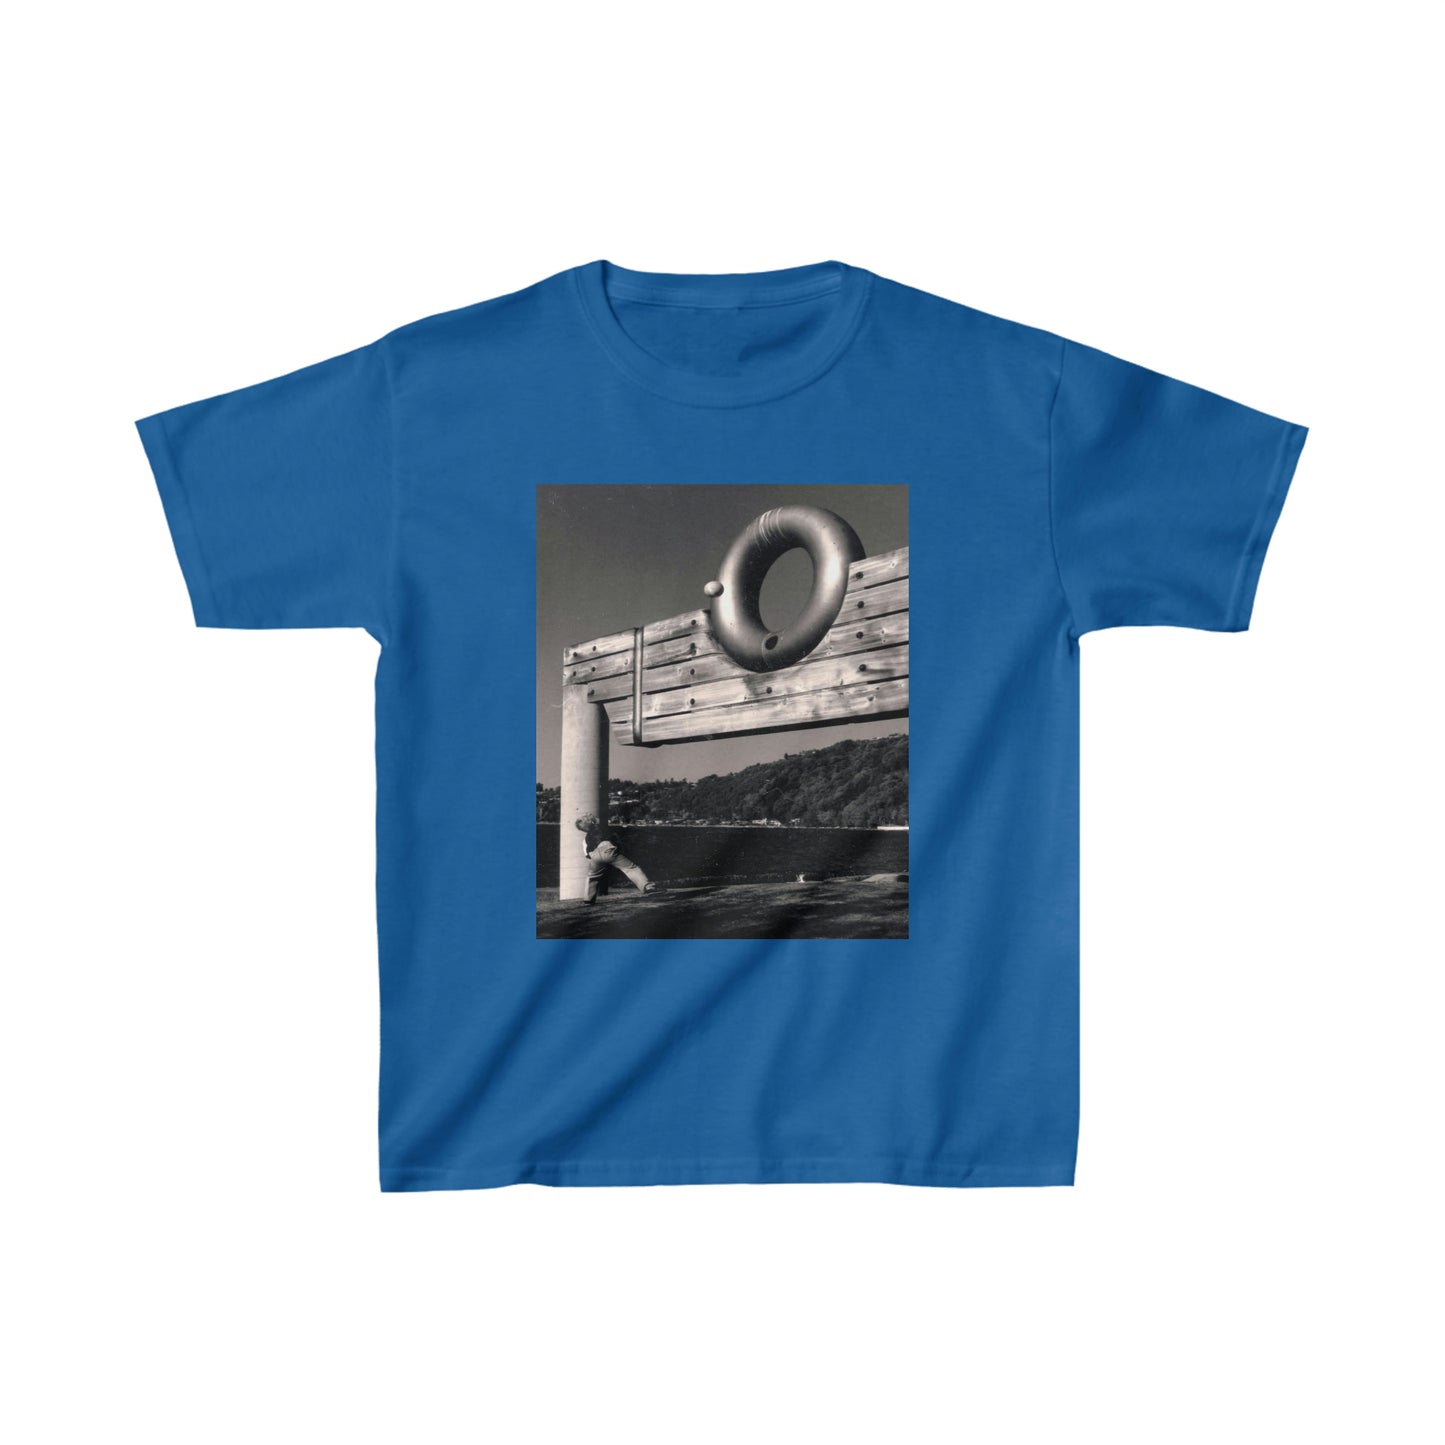 Great Throw - Kids Cotton Tee - Fry1Productions